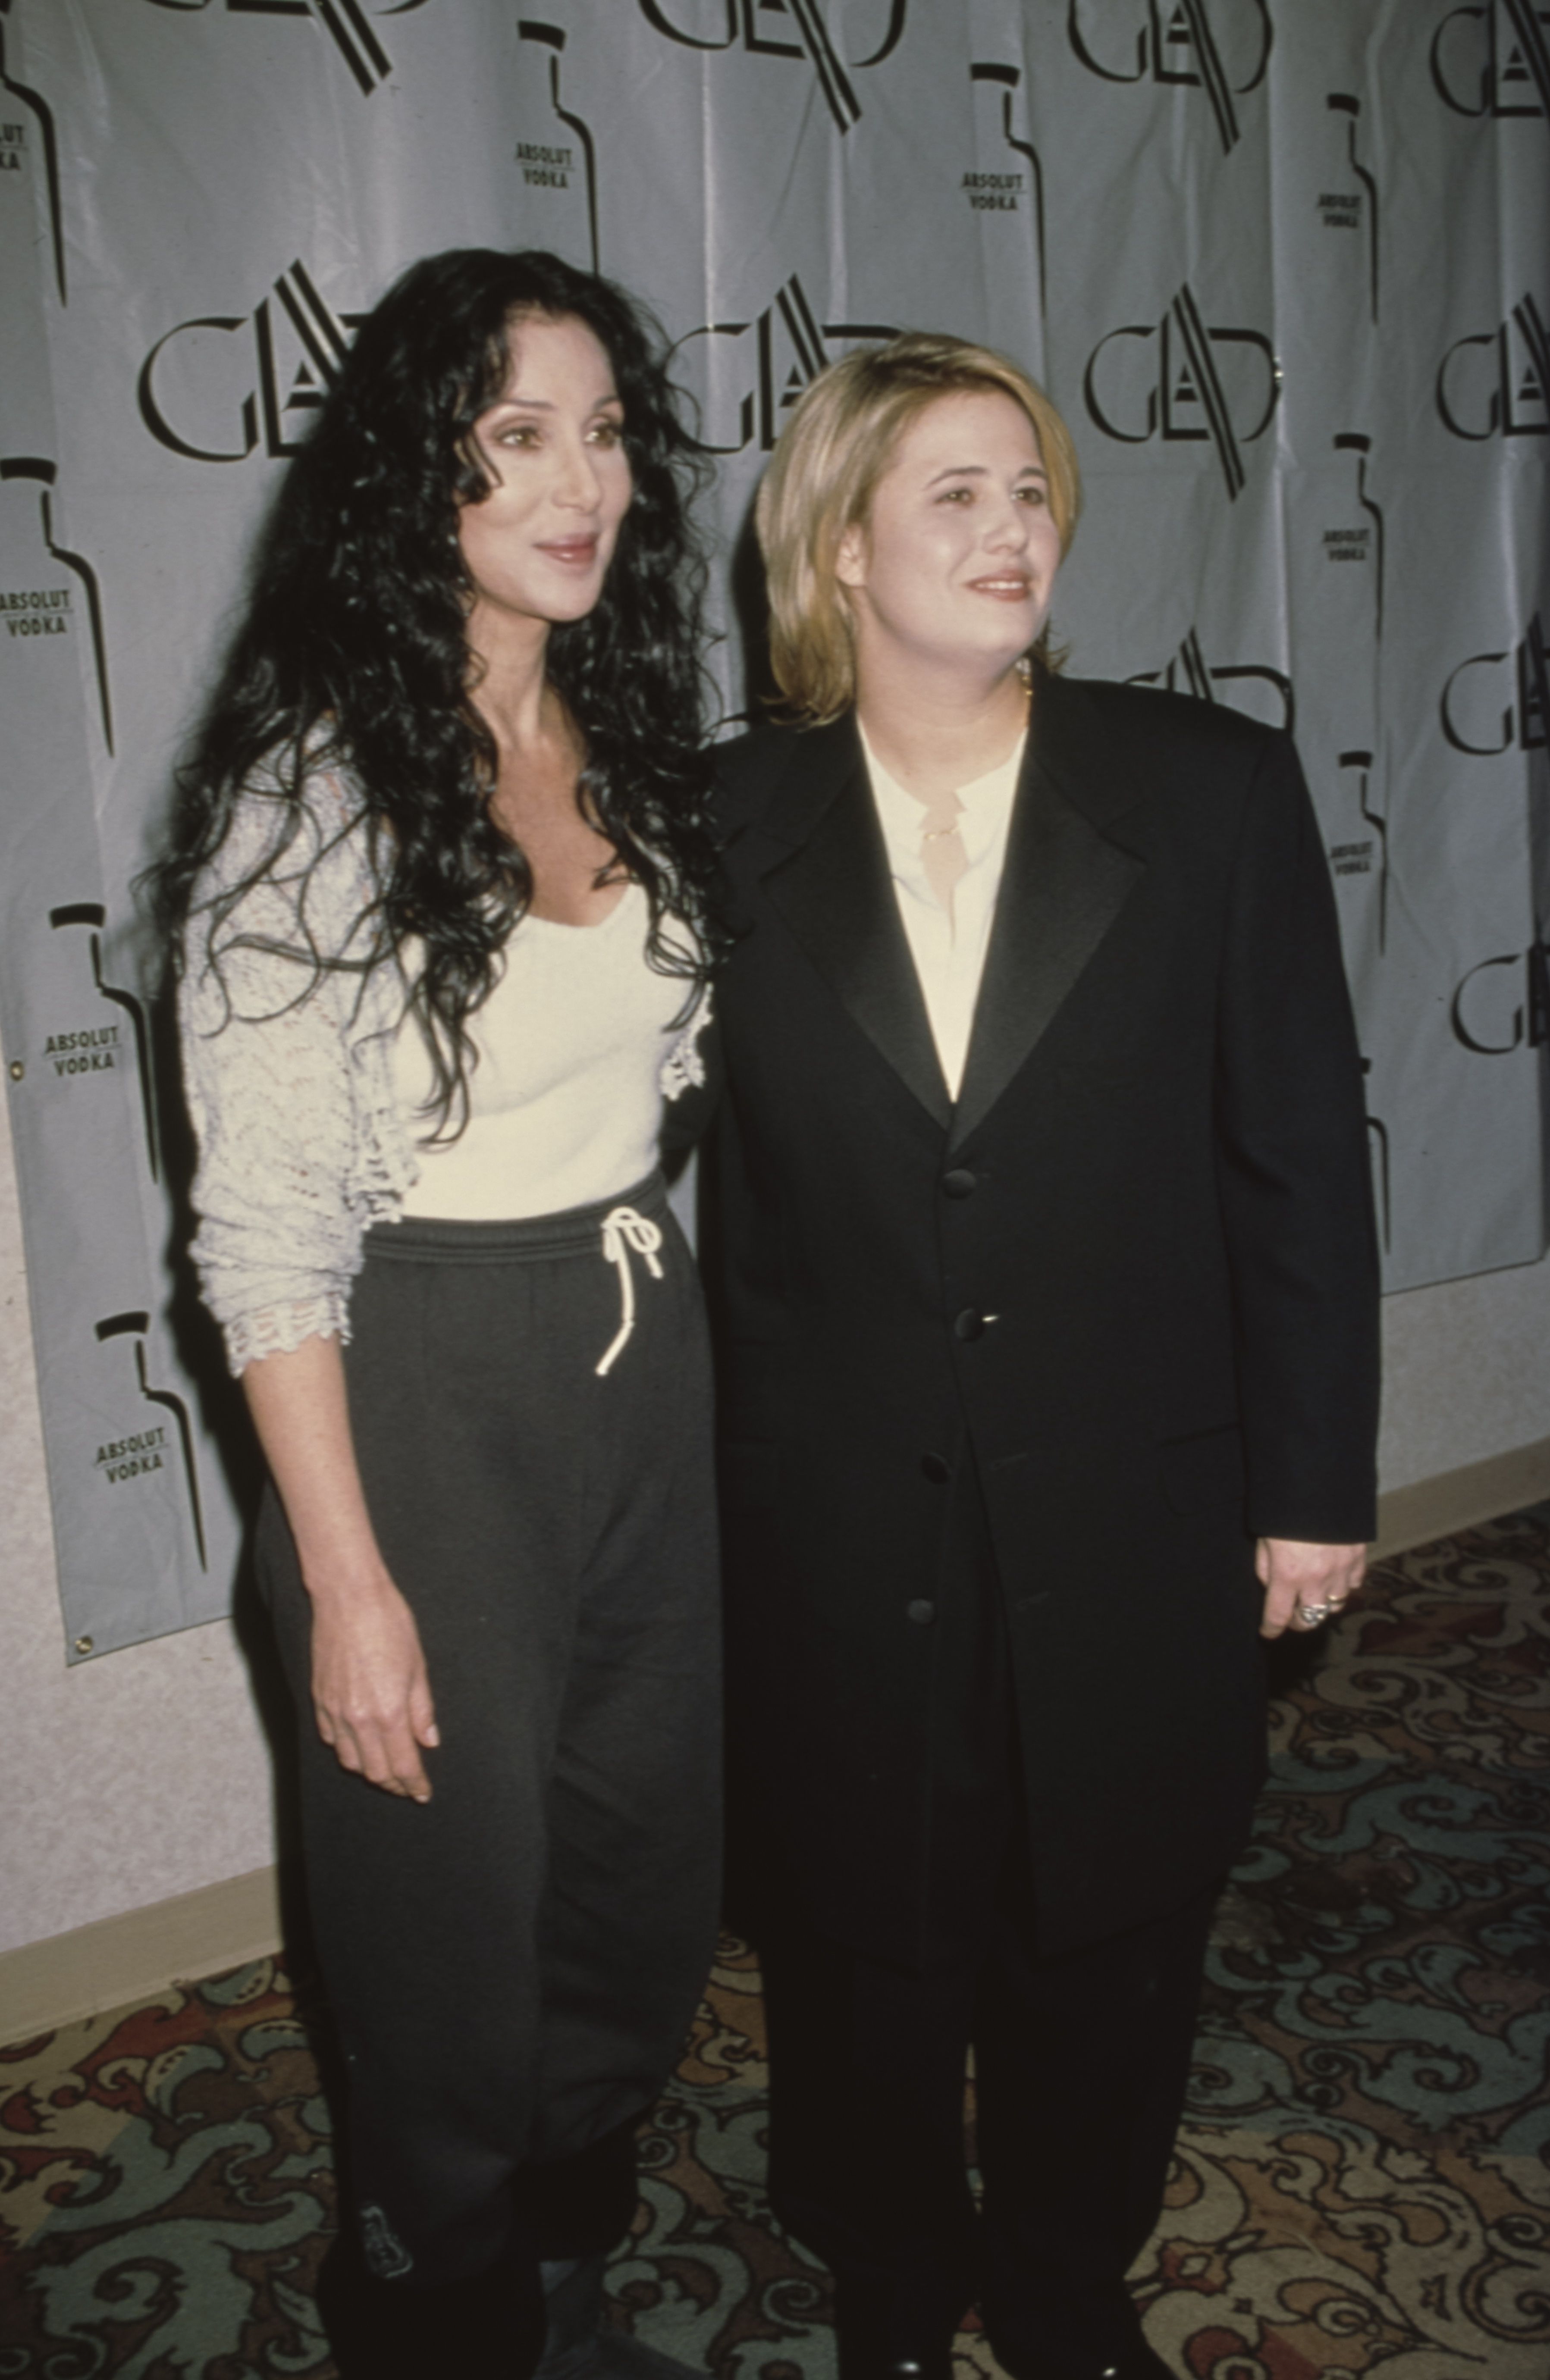 Cher und Chastity Bono bei den 19th Annual Glaad Media Awards in Los Angeles, Kalifornien am 19. April 1998. | Quelle: Getty Images